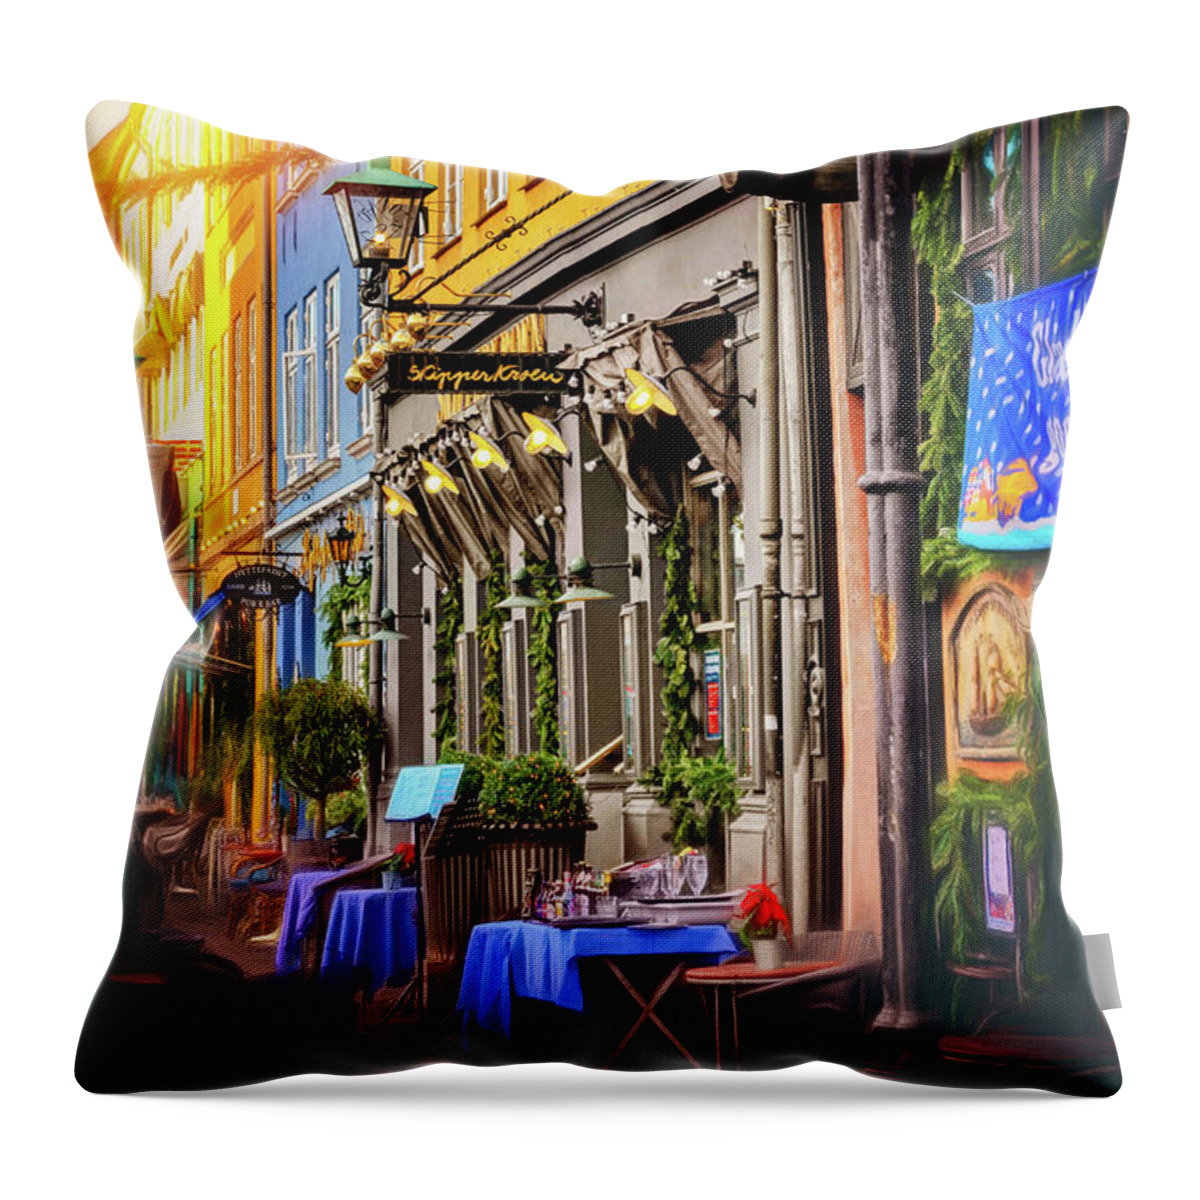 Nyhavn Throw Pillow featuring the photograph Cafe Row Nyhavn Copenhagen by Carol Japp